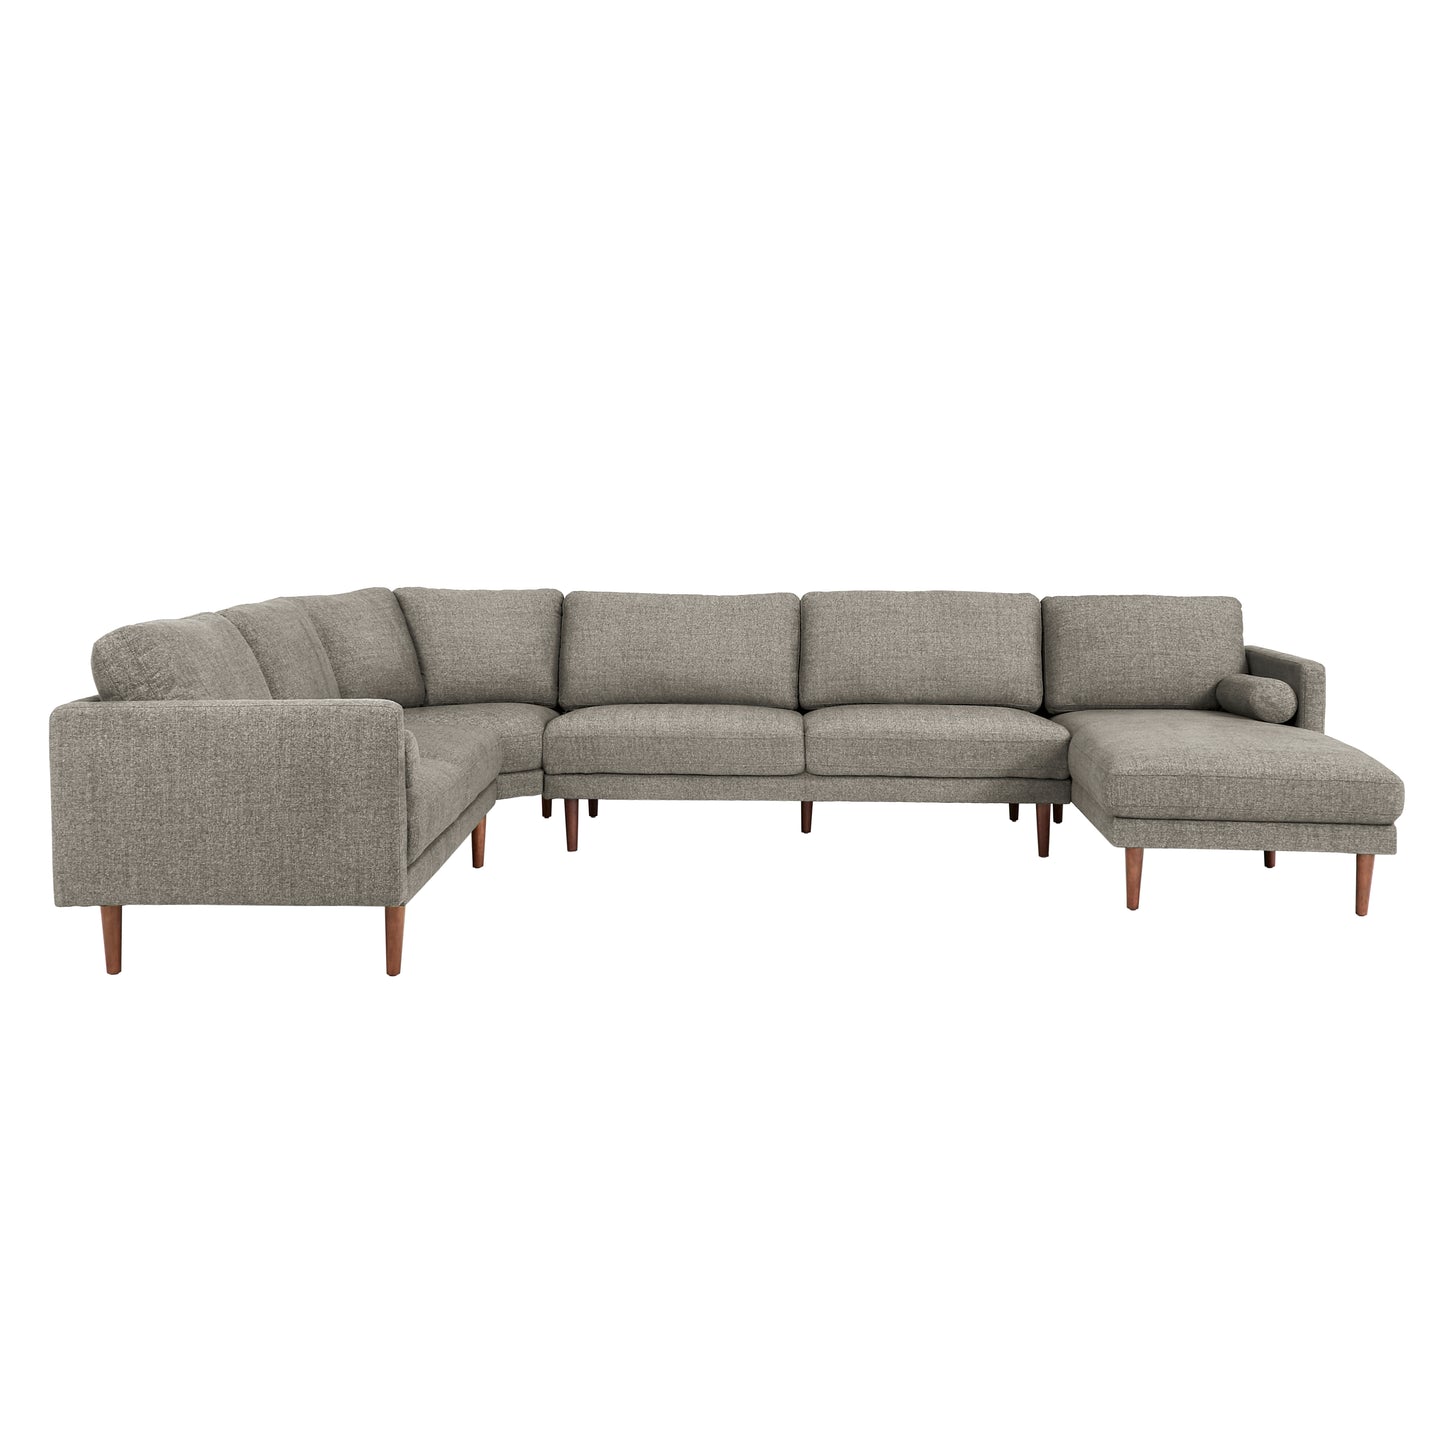 Mid-Century Upholstered Sectional Sofa - Light Grey, 7-Seat, U-Shape Sectional with Right-Facing Chaise